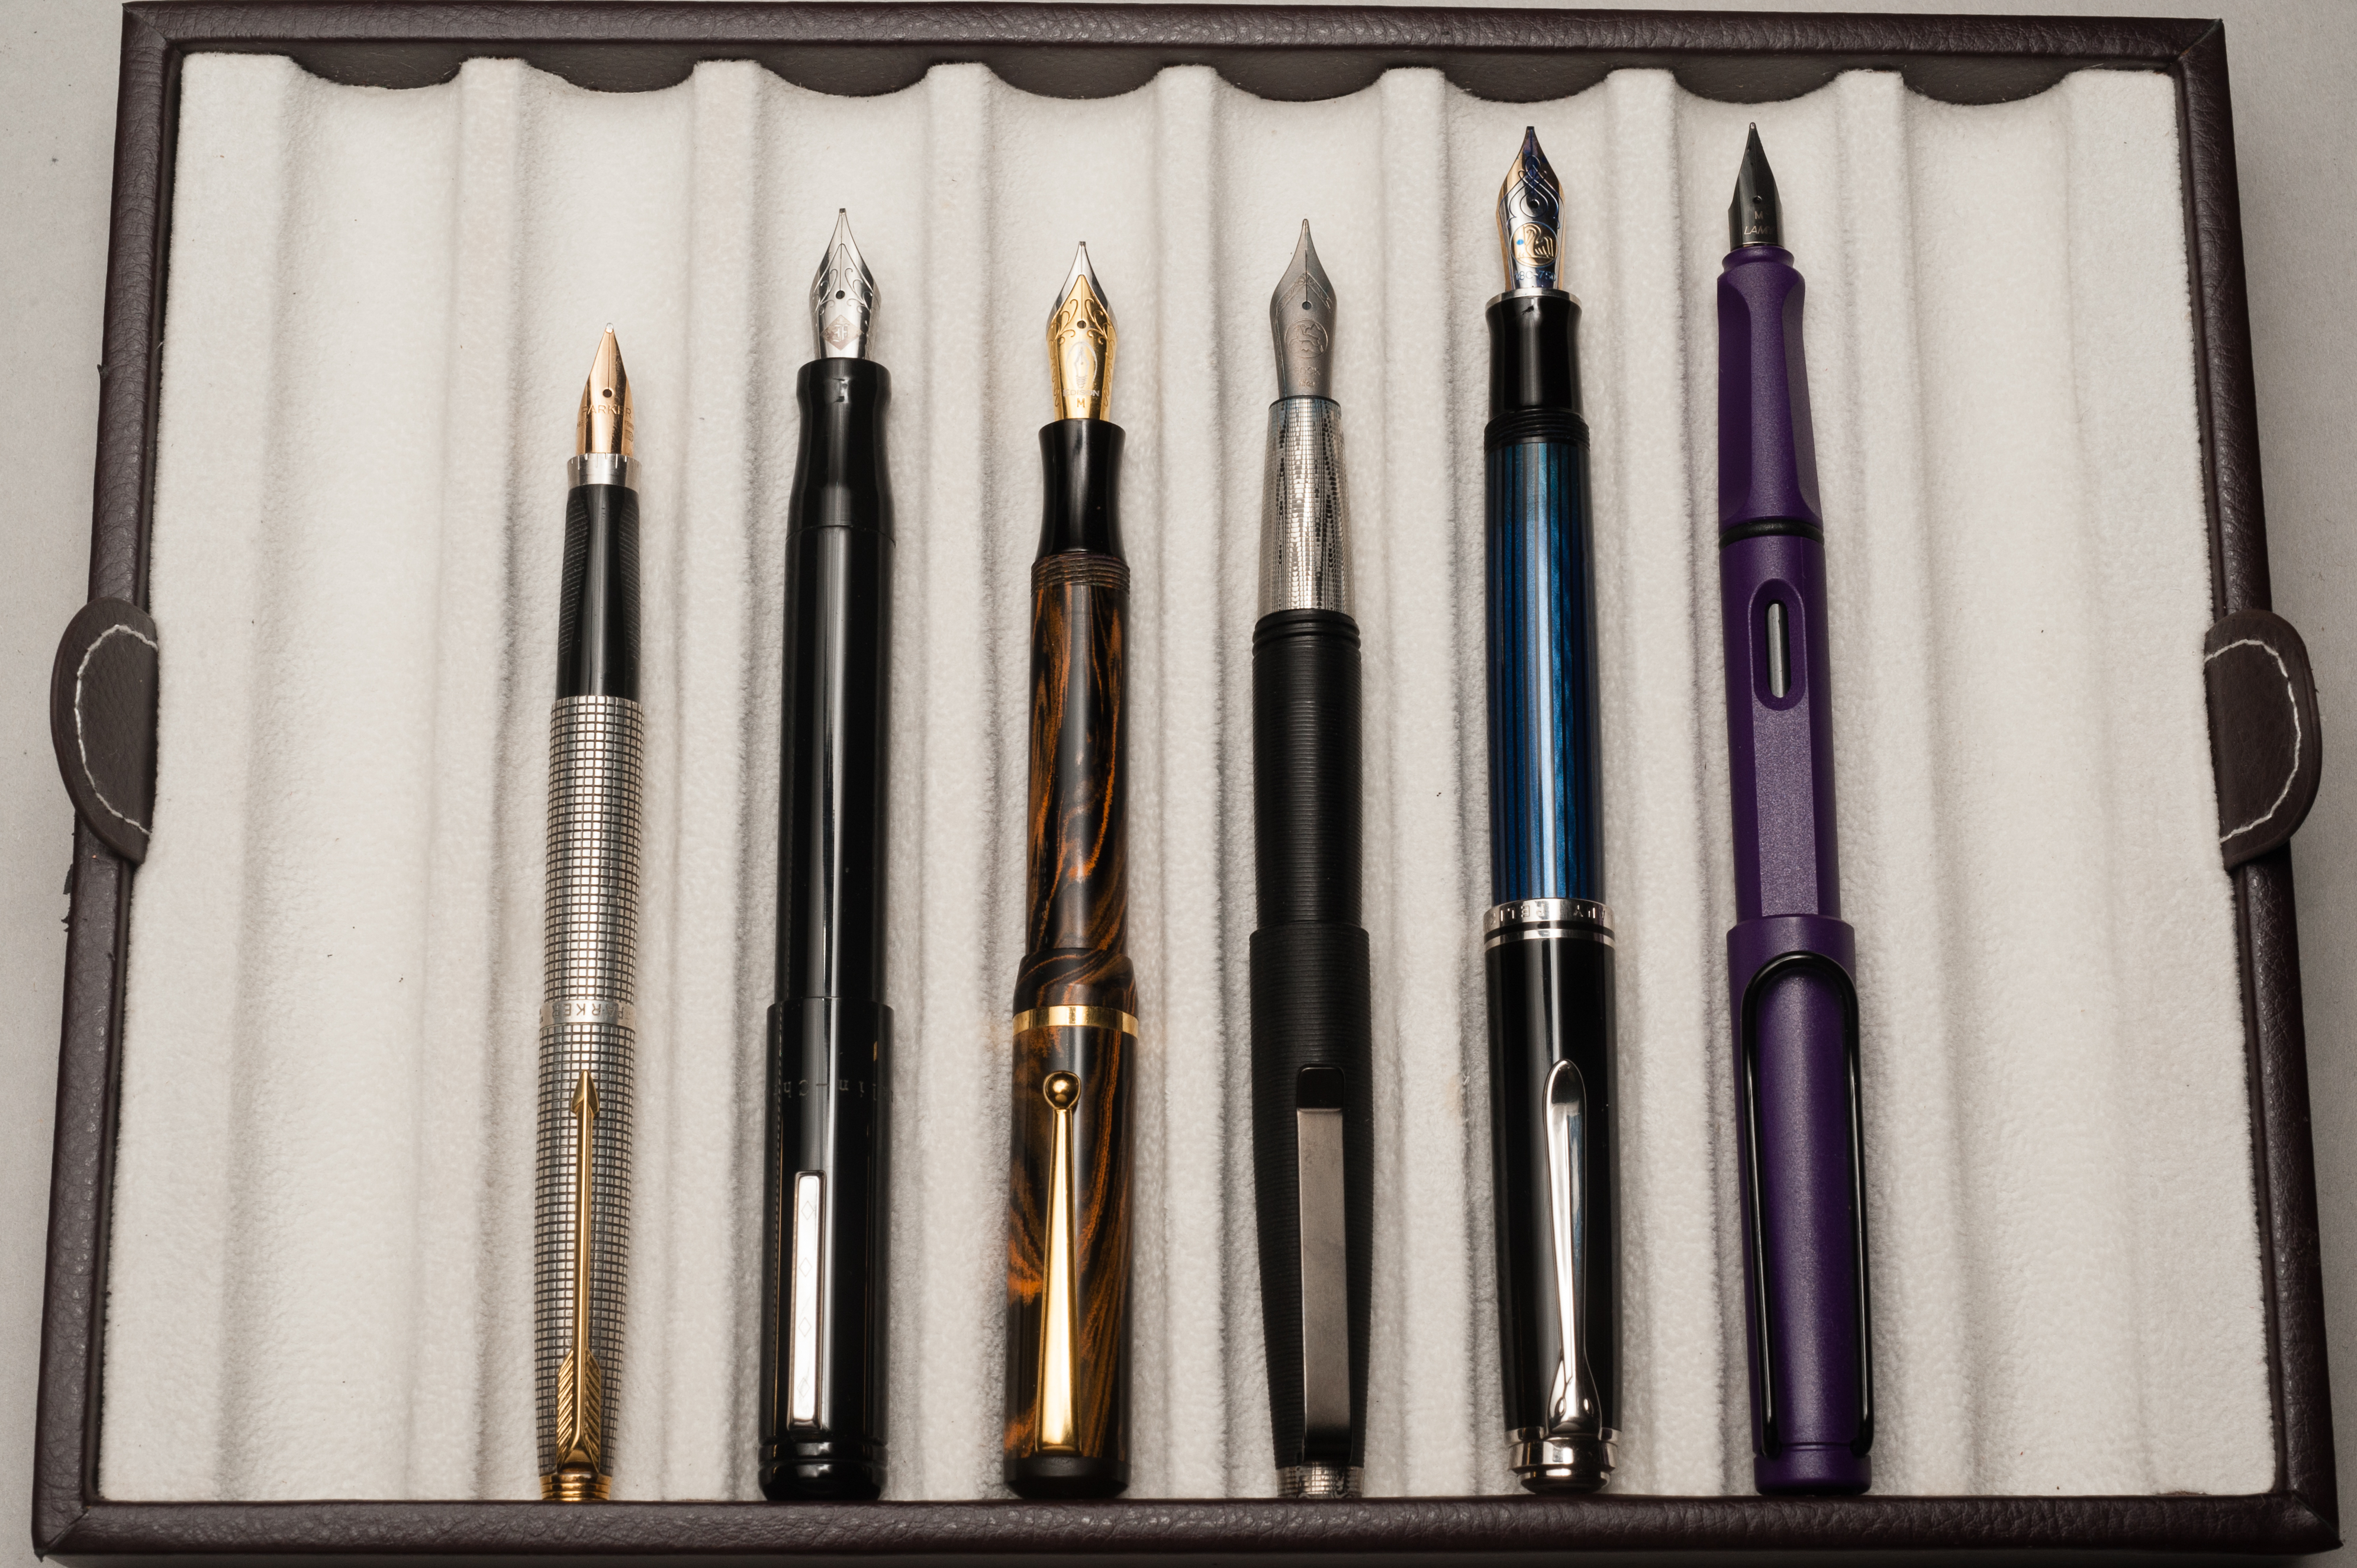 Posted pens from left to right: Parker 75, Franklin-Christoph Model 20, Edison Beaumont, Tactile Turn Gist, Pelikan M805, and Lamy Safari